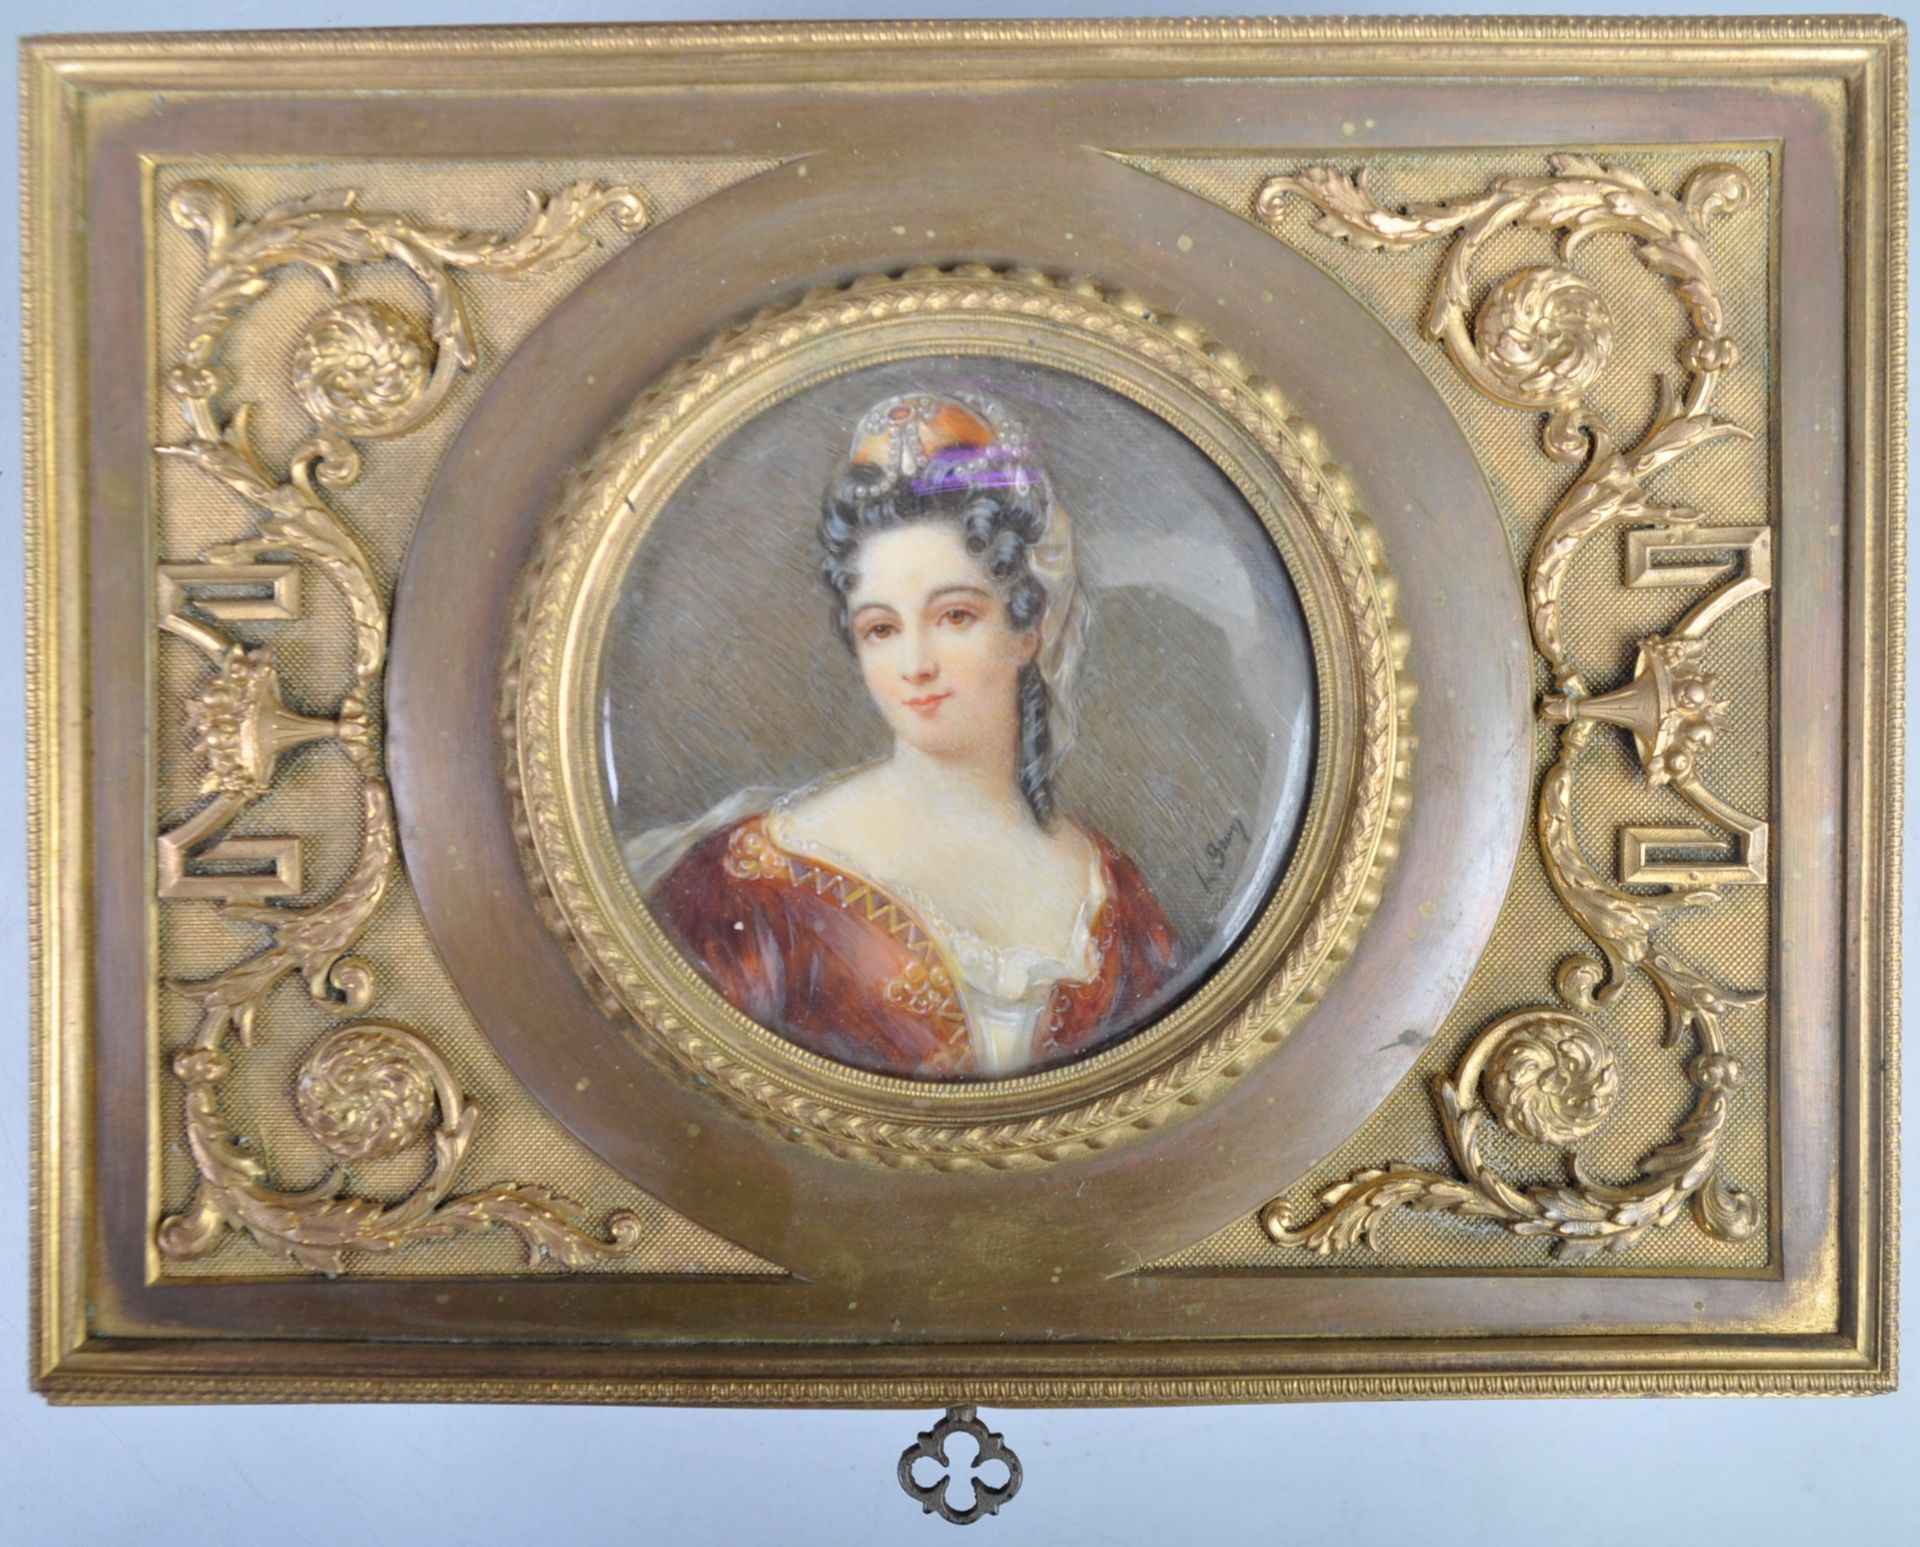 19TH CENTURY FRENCH PALAIS ROYALE GILDED ORMOLU CASKET - Image 2 of 6